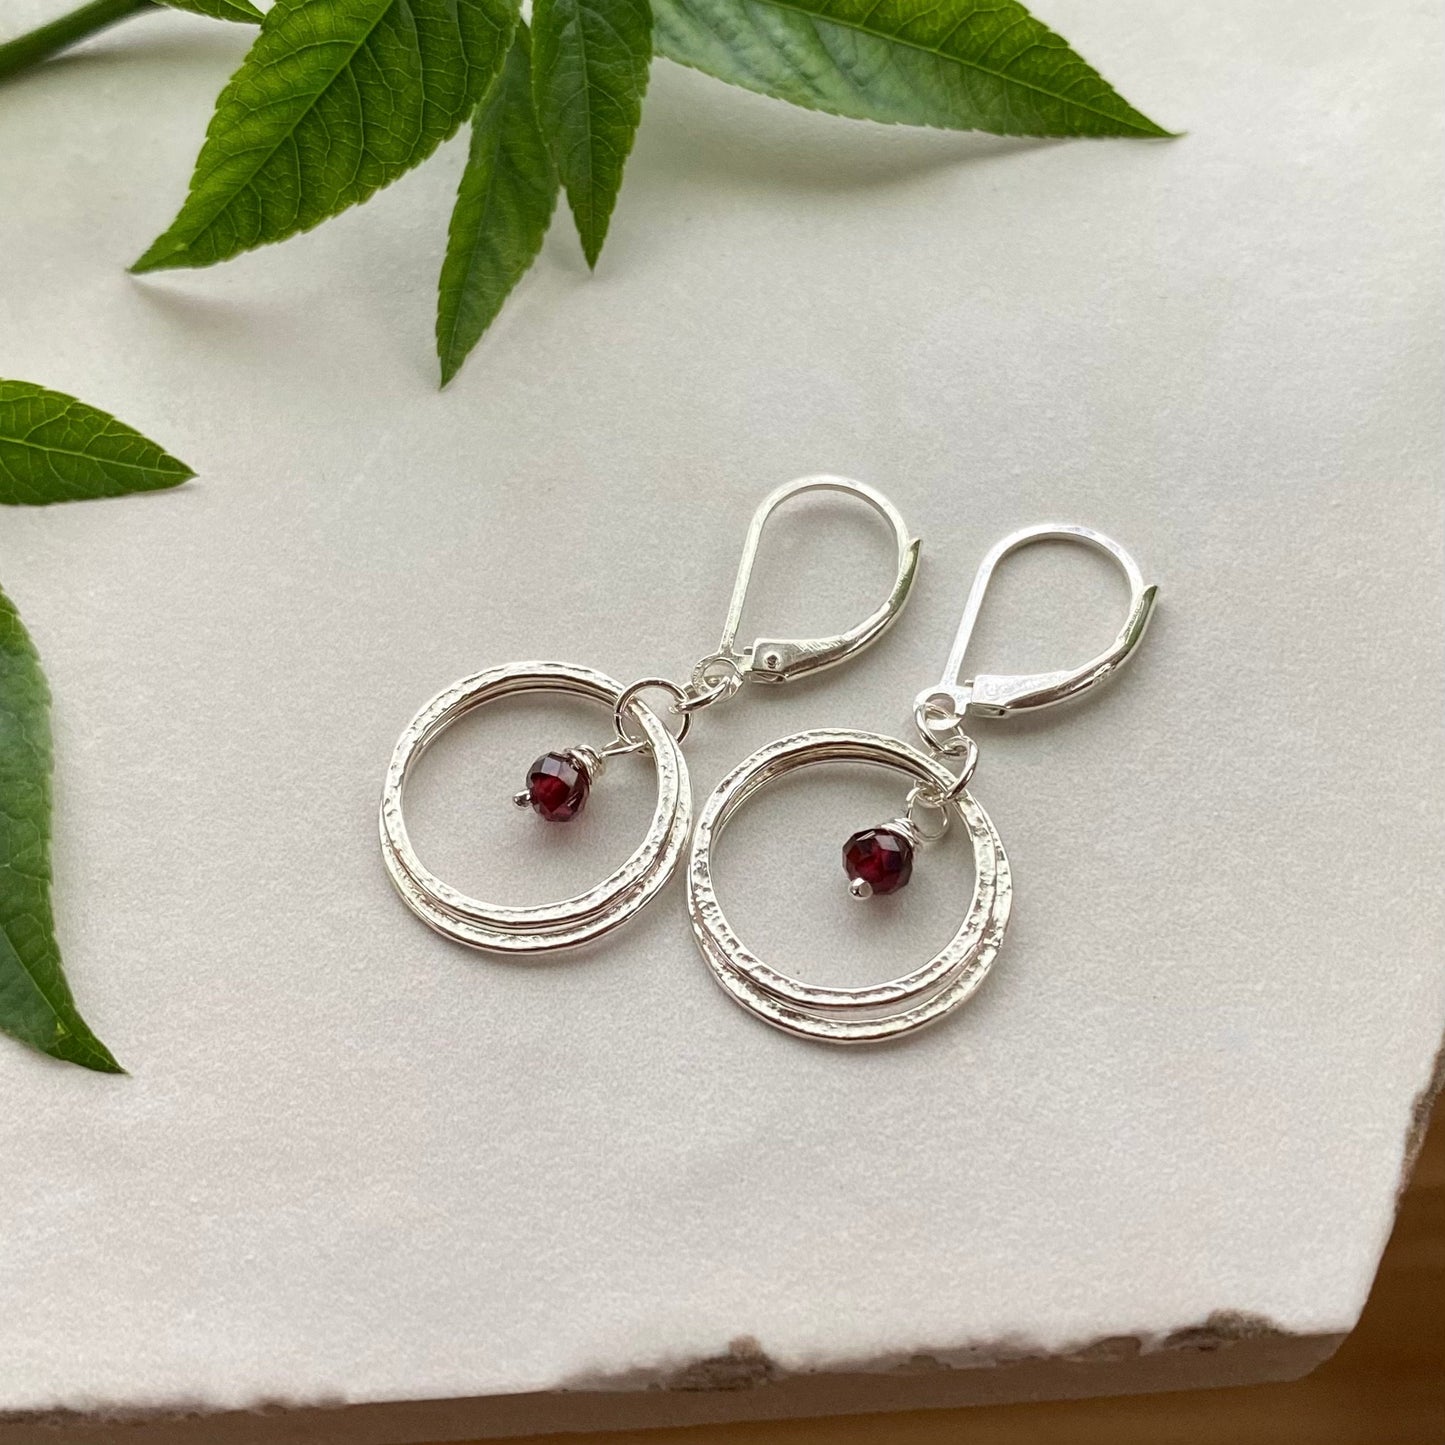 Sterling Silver Sparkly Textured Double Hoop Earrings with Birthstones, 5/8" Circle Dangle Drop Minimalist Style, Elegant Birthday Gift